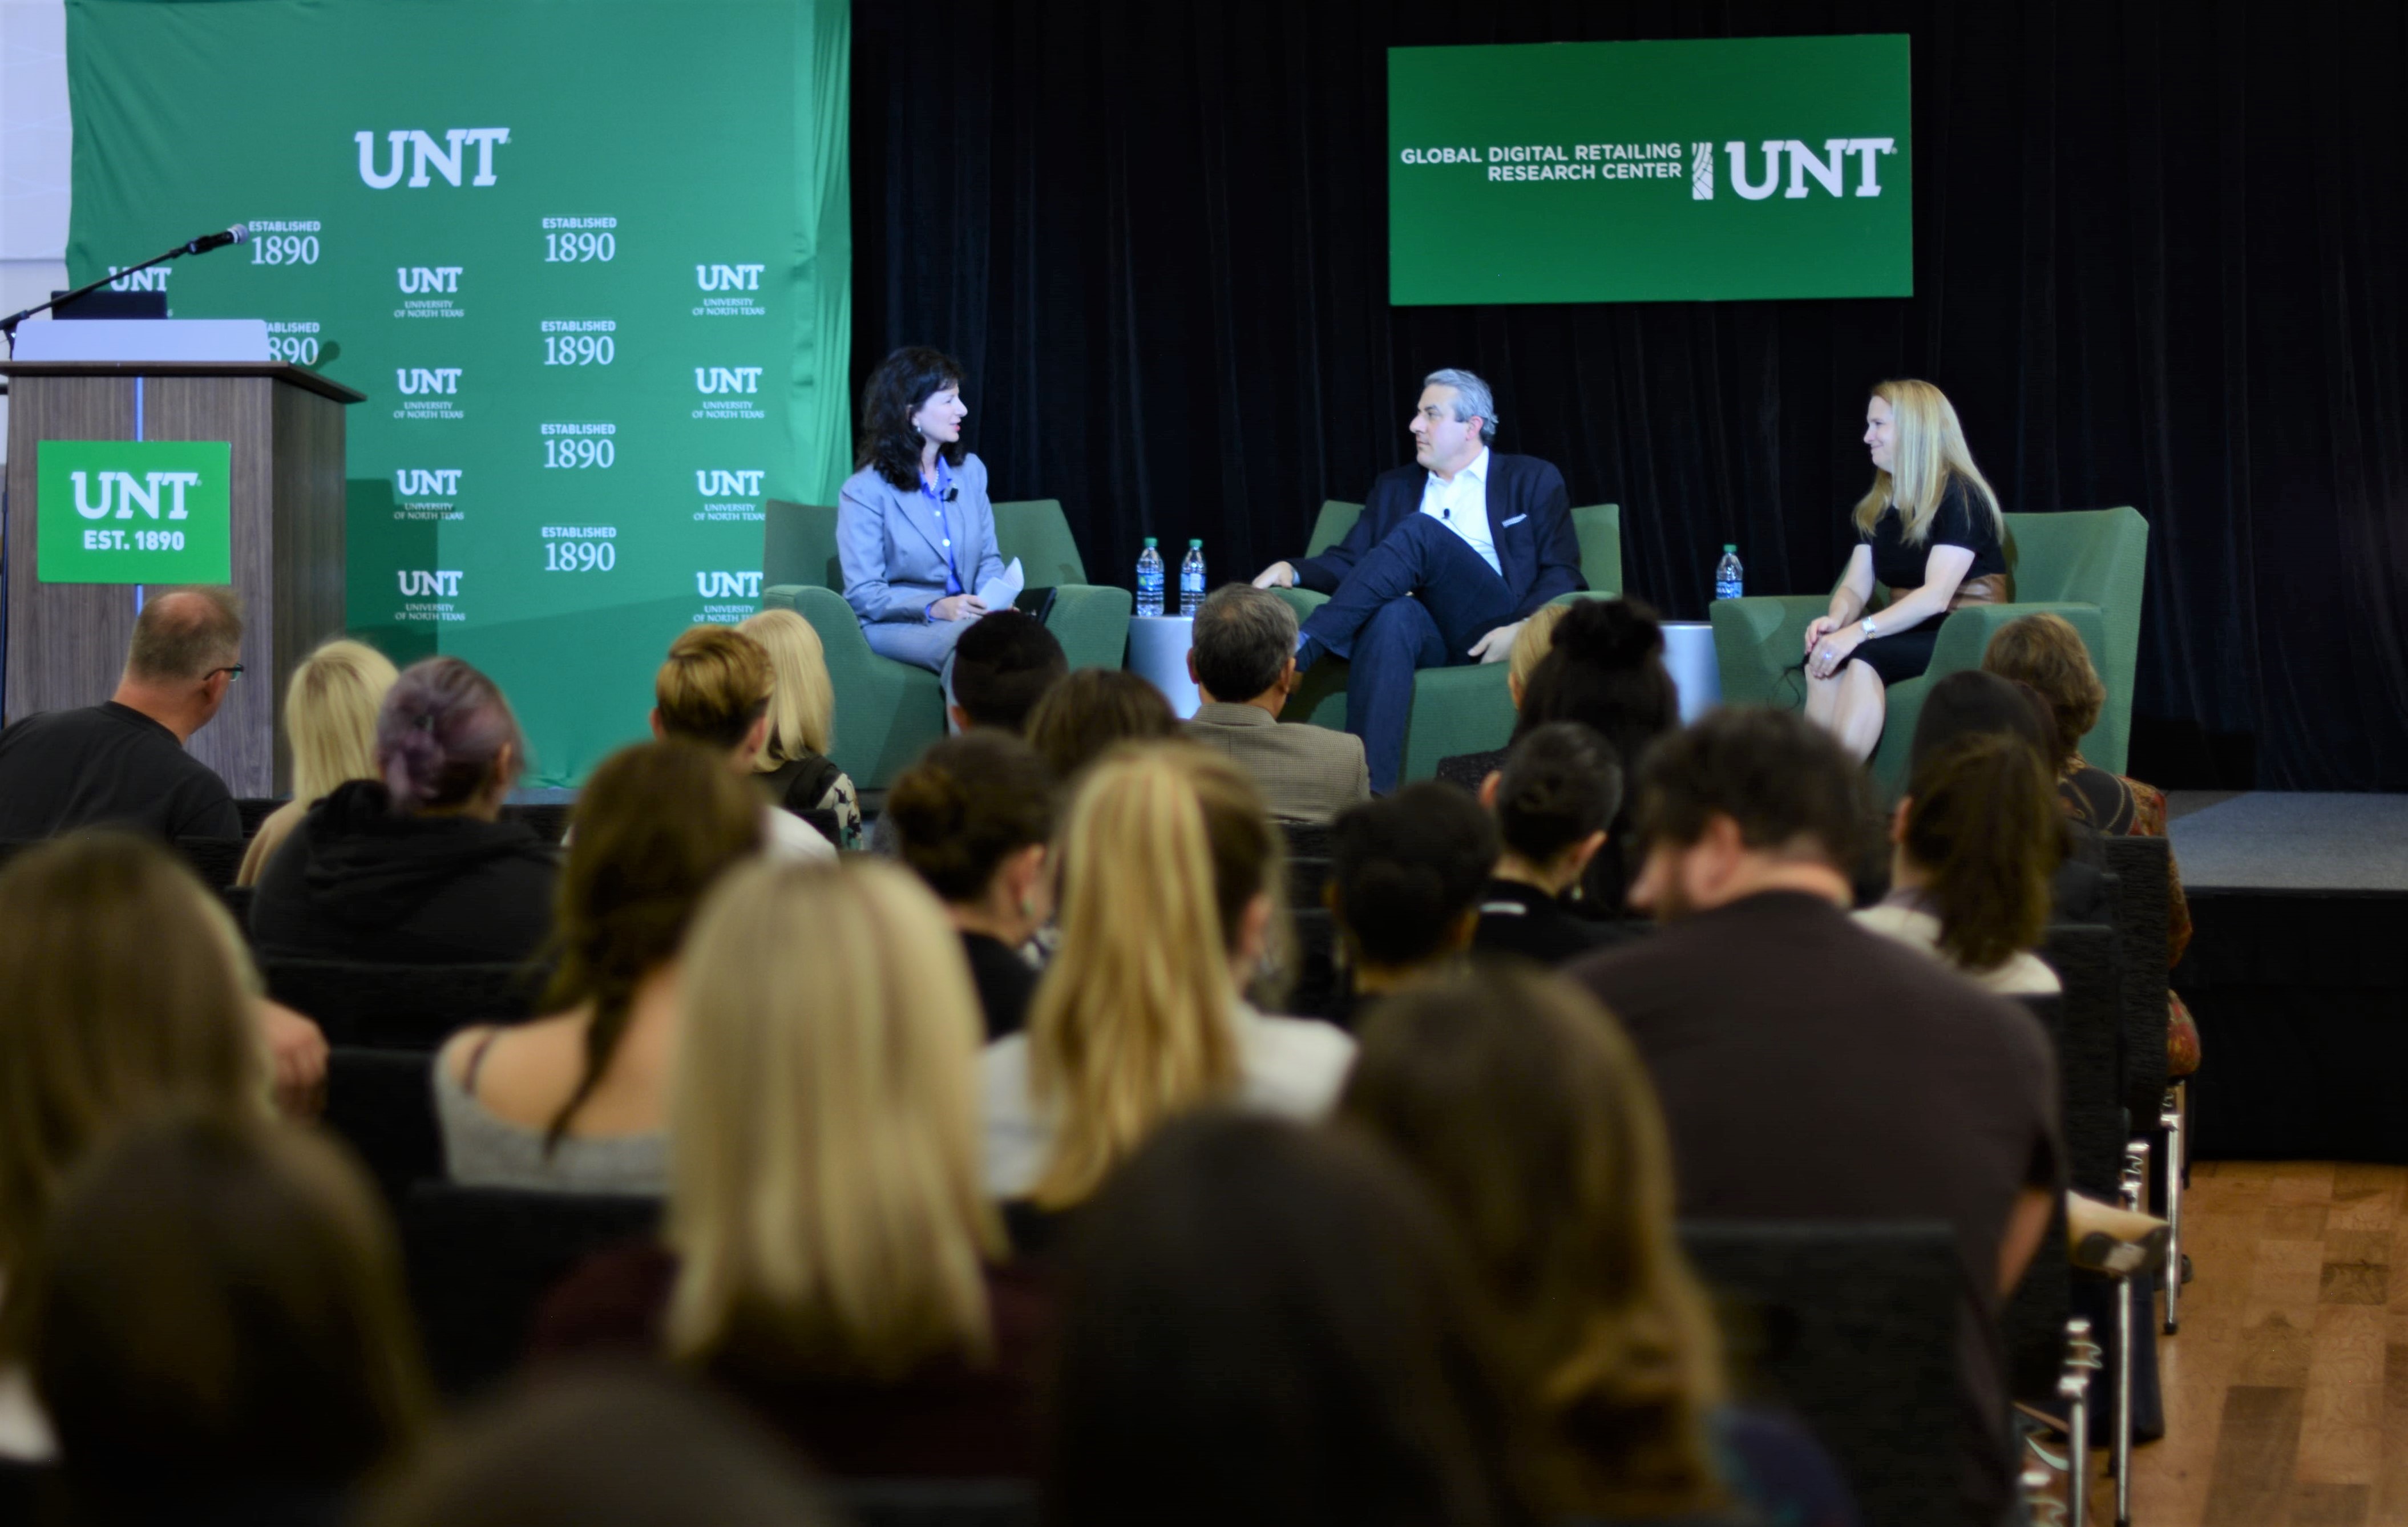 UNT retail event to focus on challenges, opportunities facing industry